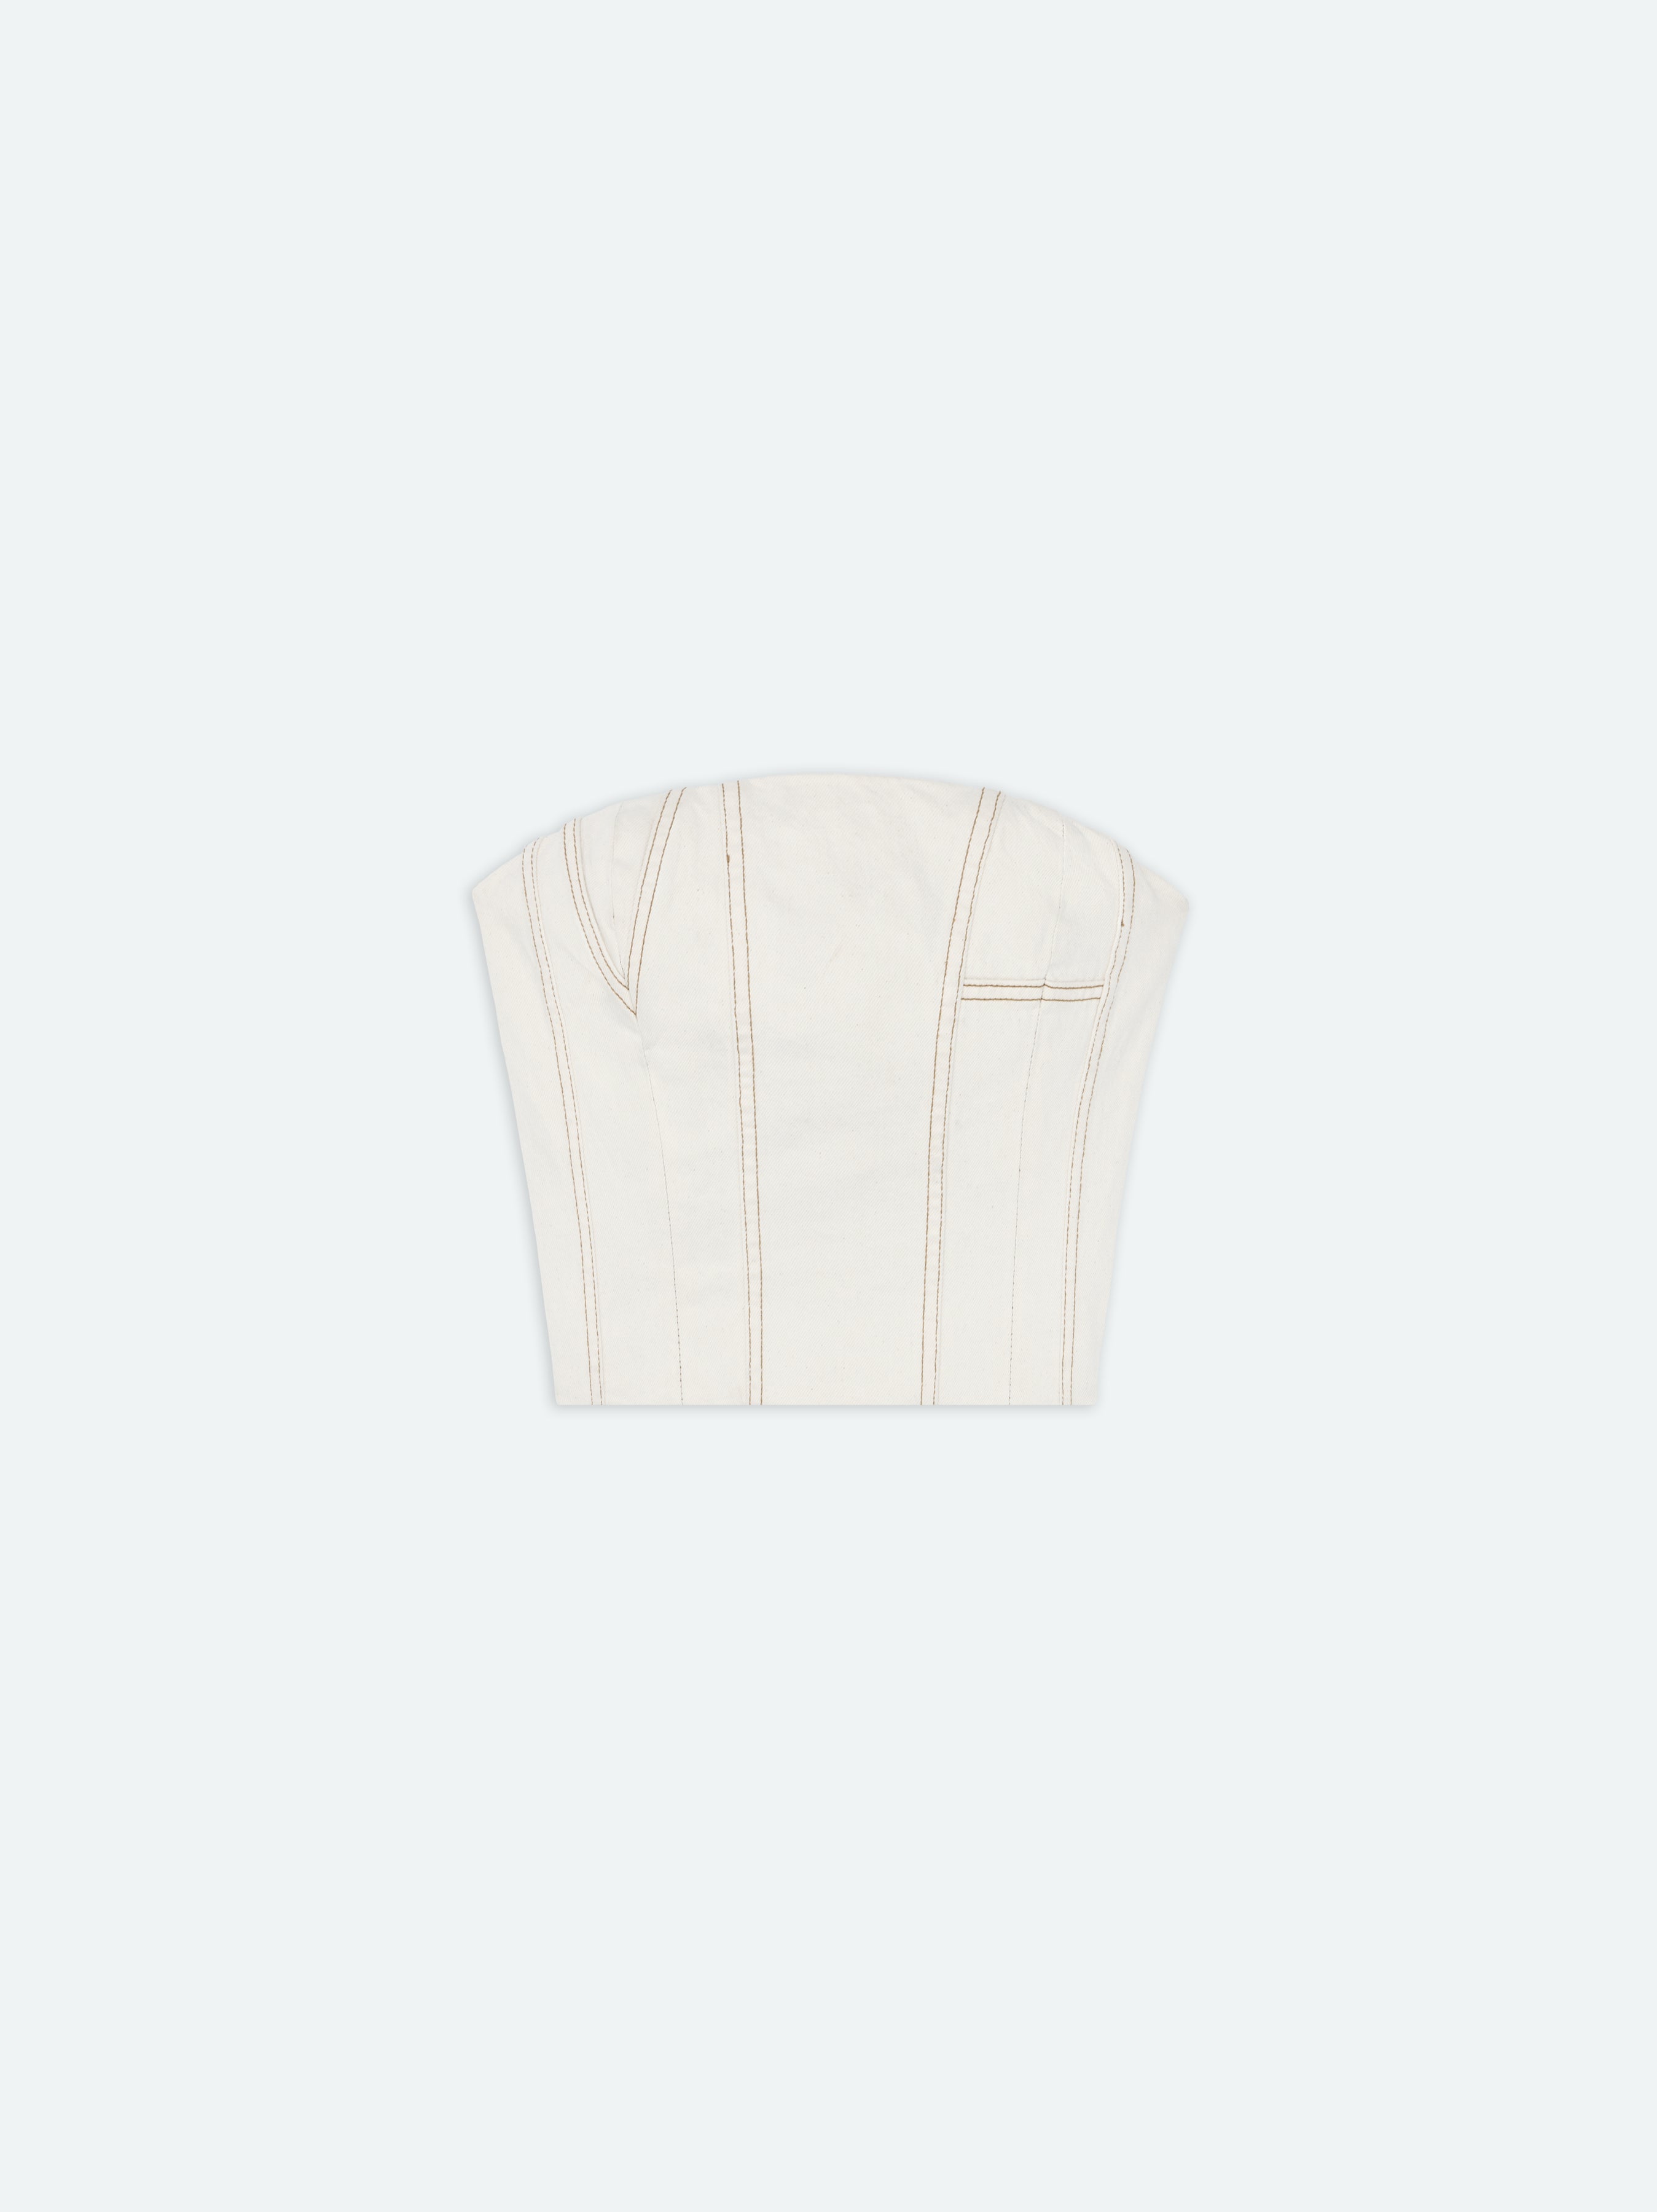 Product WOMEN - MA BUSTIER - Alabaster featured image